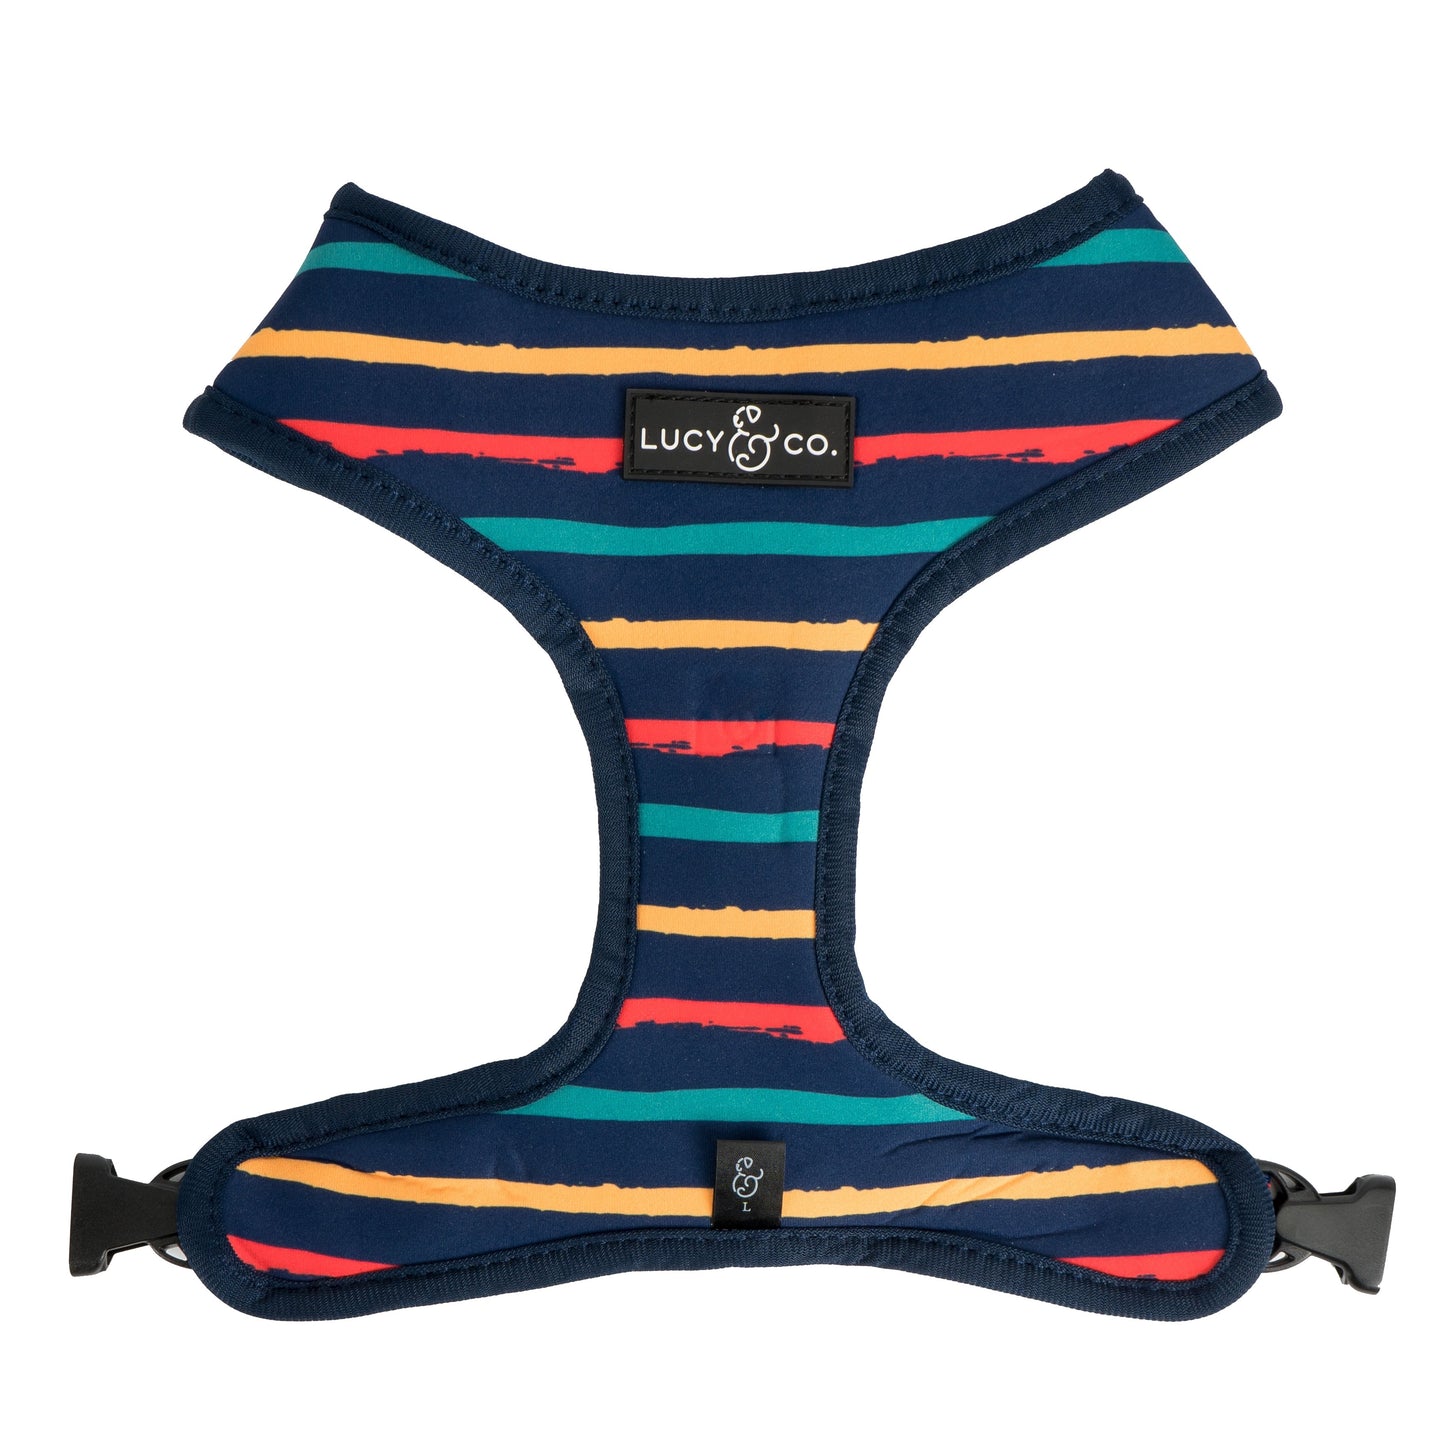 The Space Doodle Reversible Harness